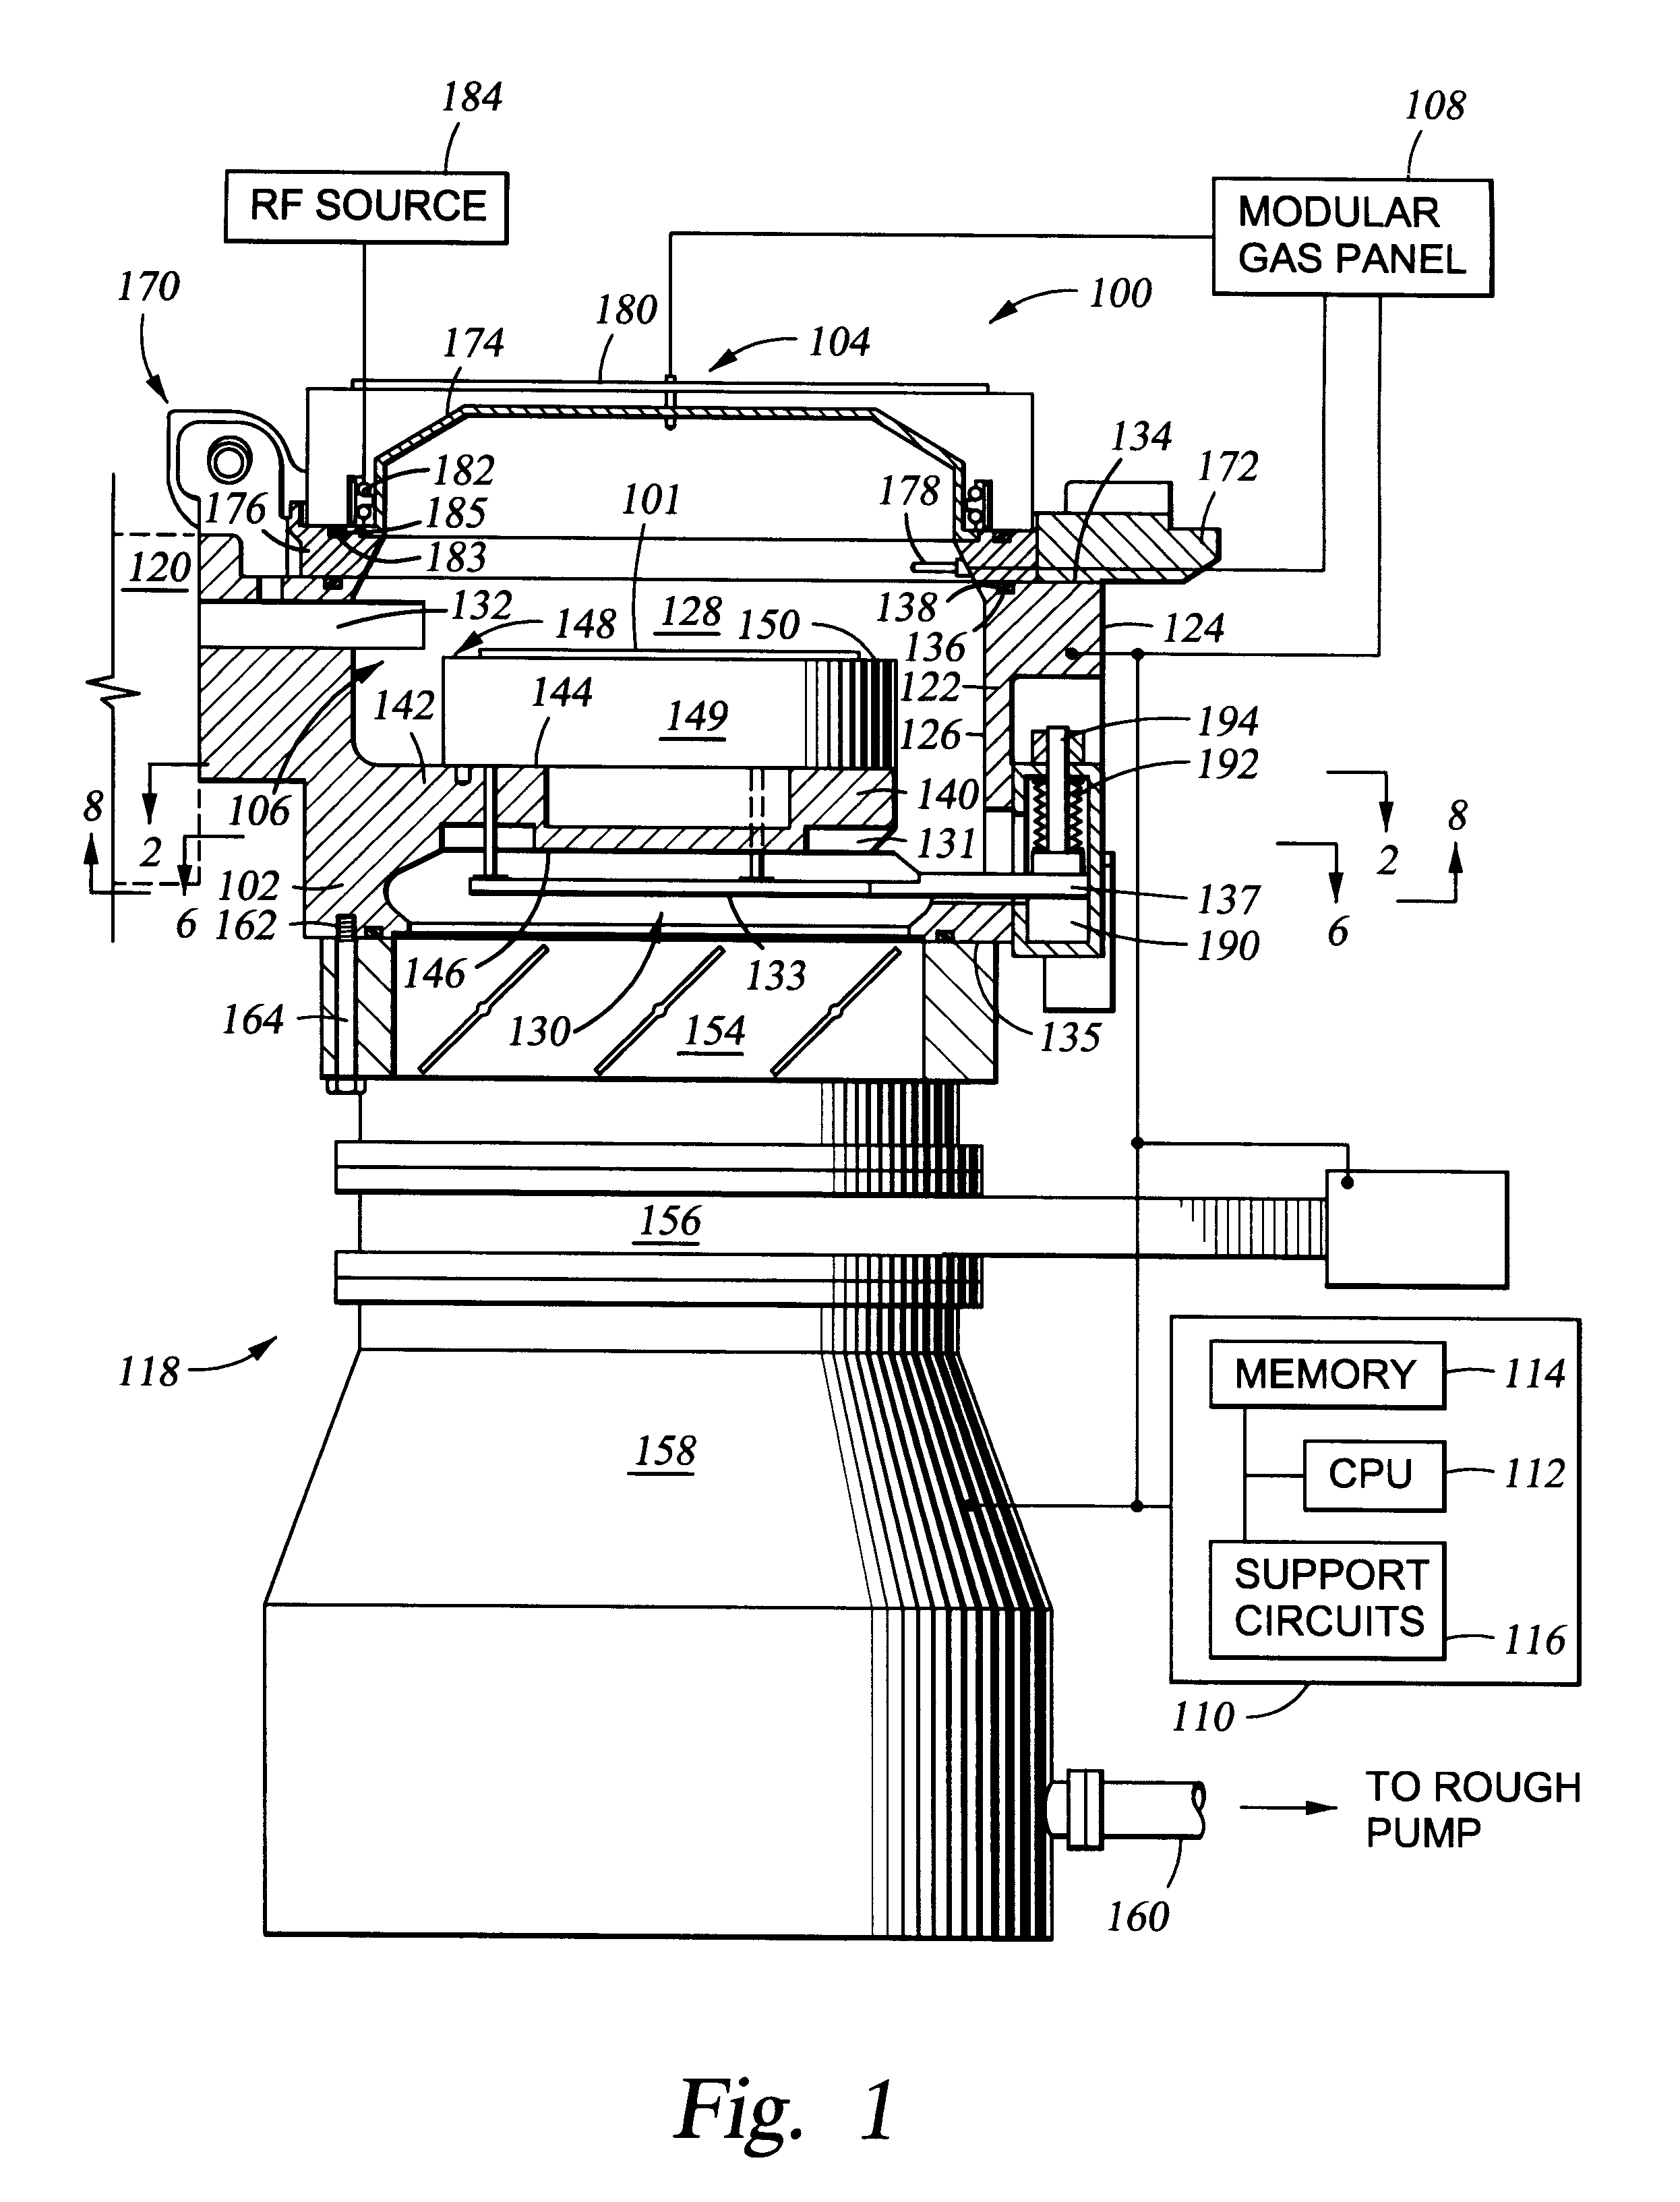 Semiconductor wafer support lift-pin assembly